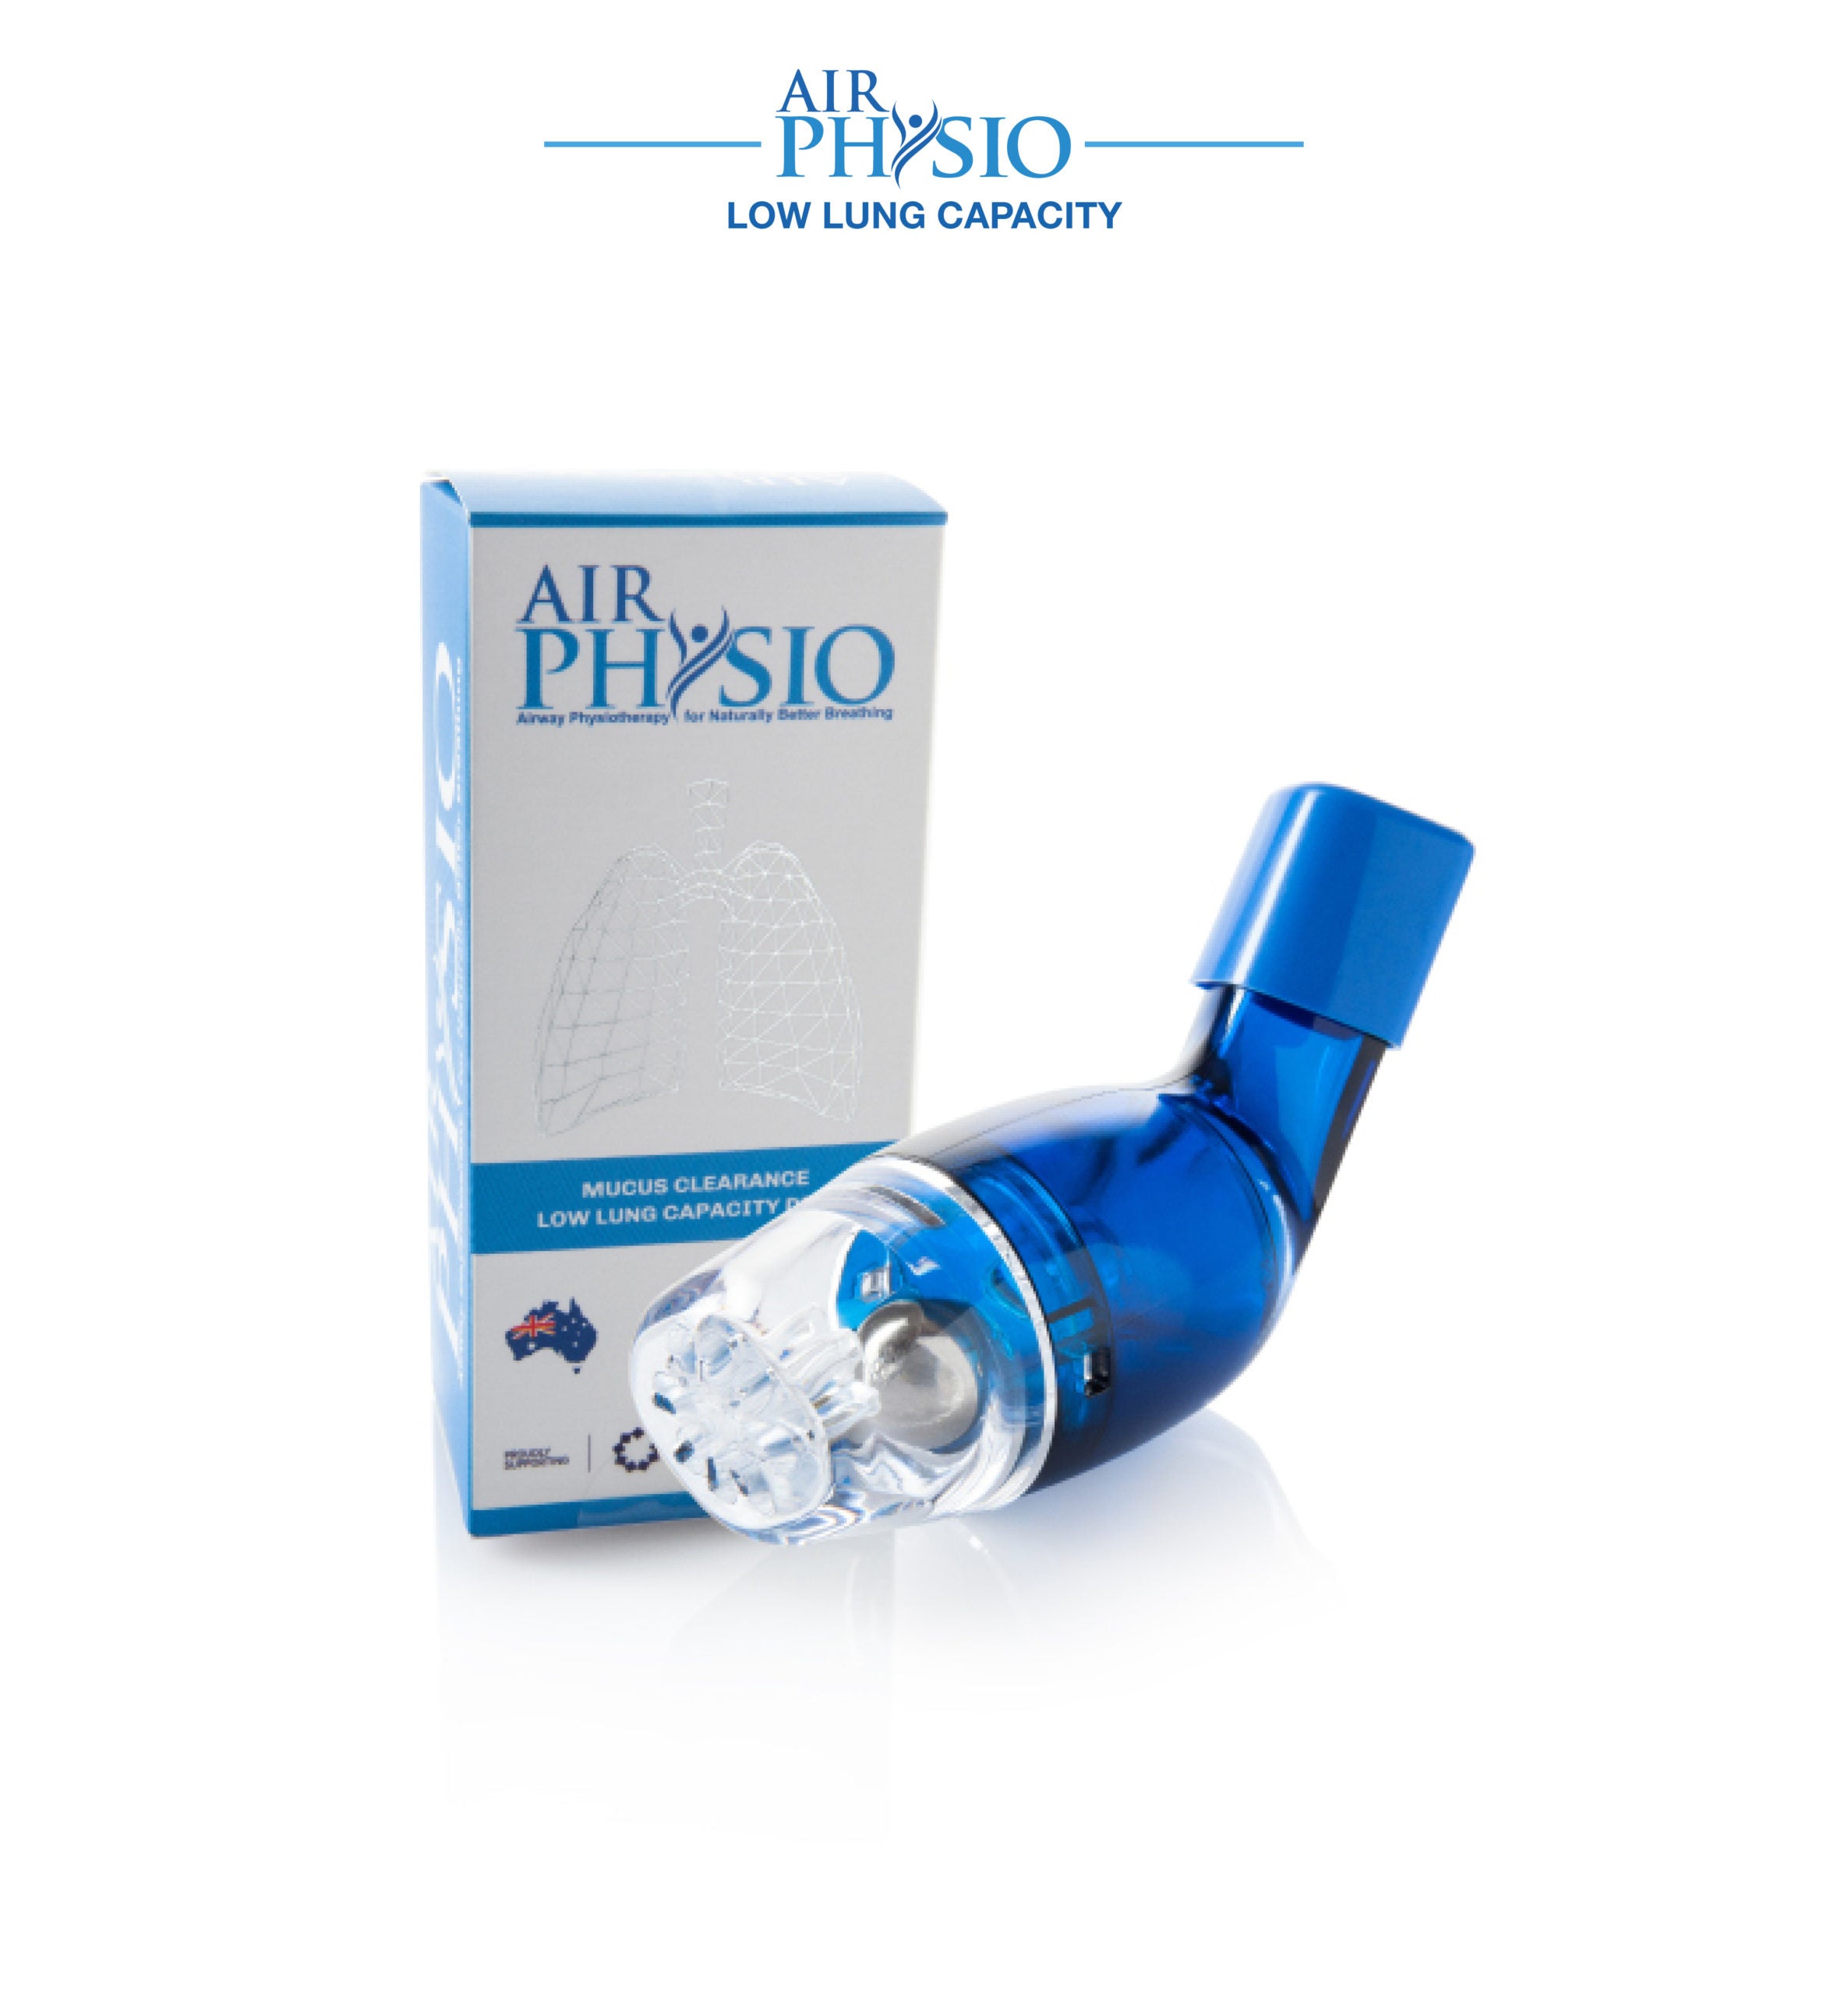 AirPhysio  Mucus Clearance Device for Low Lung Capacity